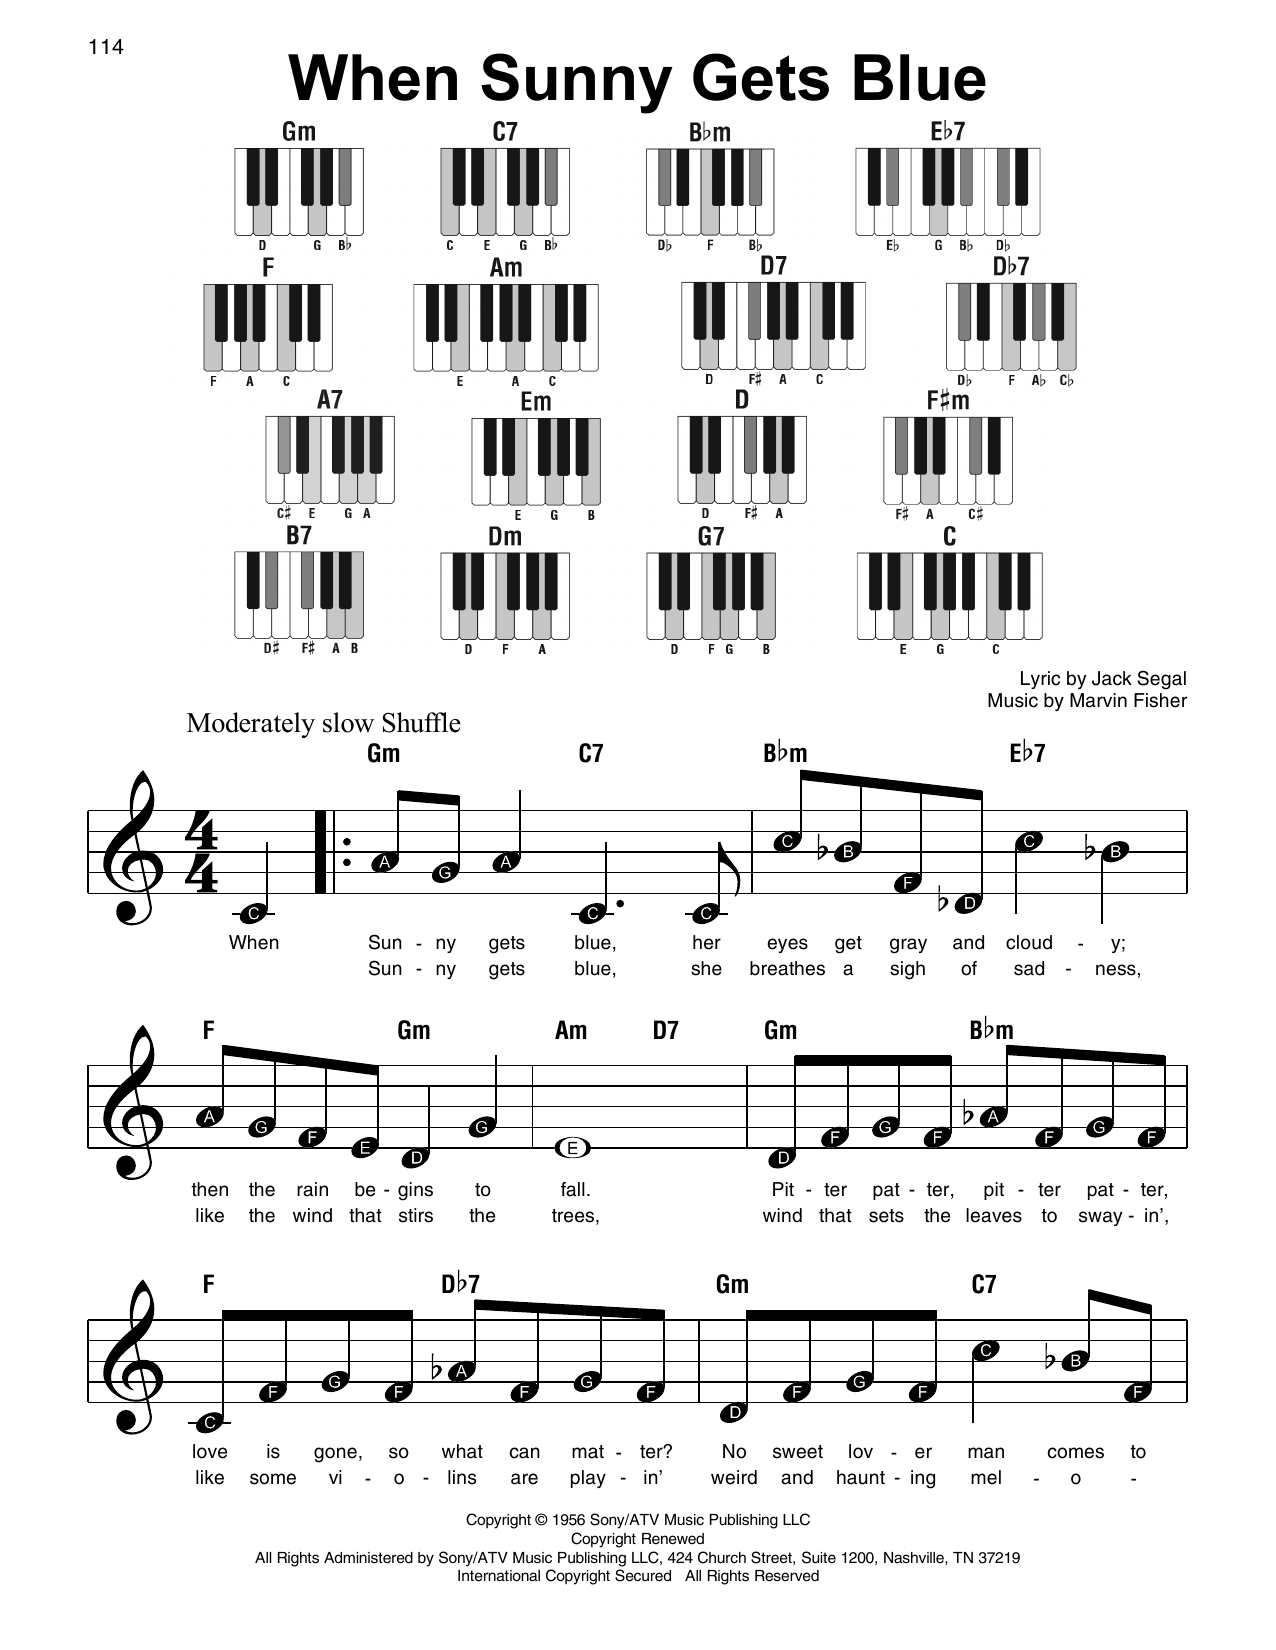 Download Marvin Fisher When Sunny Gets Blue Sheet Music